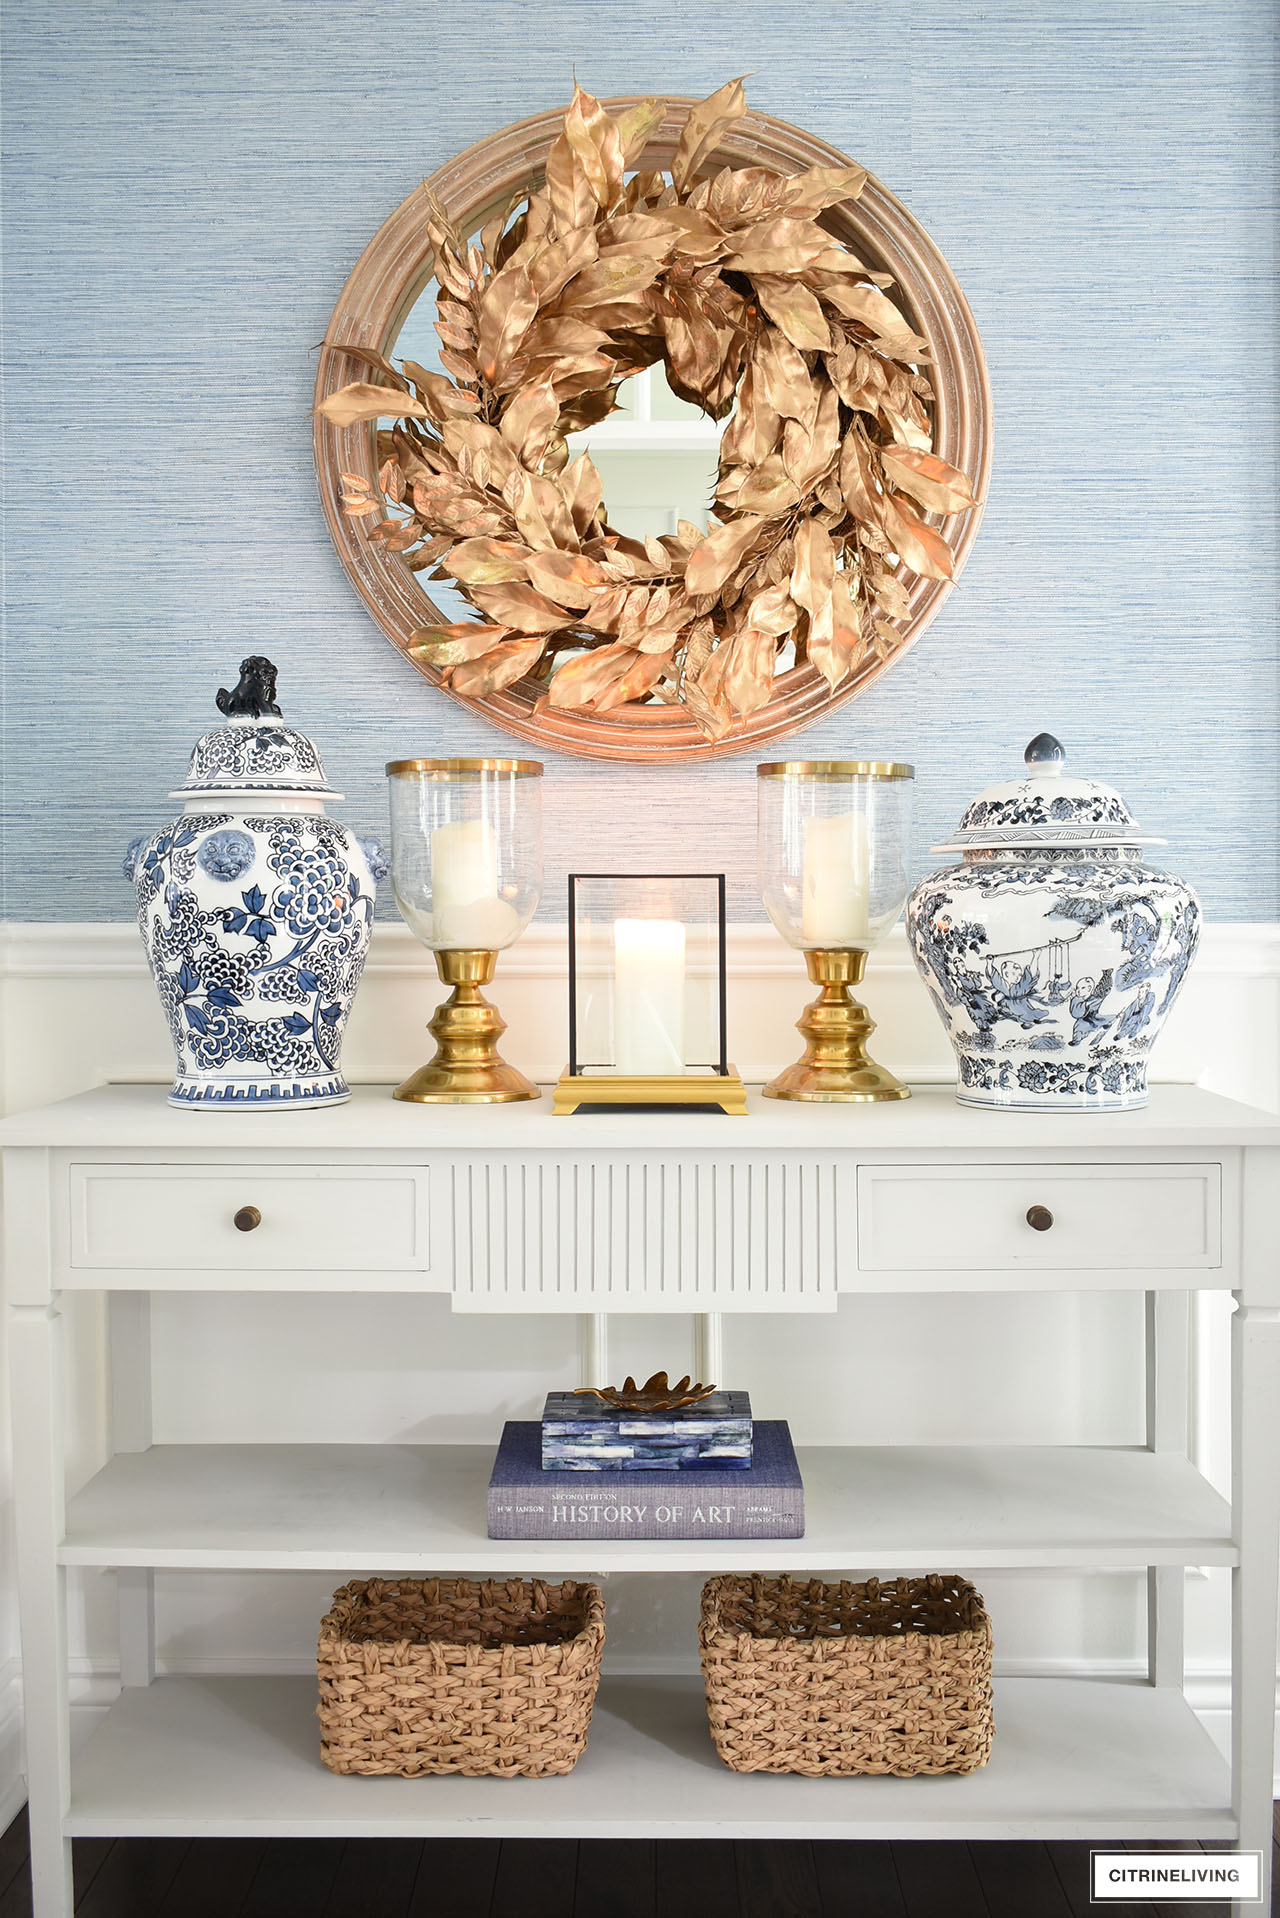 Beautifully styled console table with gold candle holders and ginger jars, styled along with accents - baskets, decorative box and book, finished with a gorgeous god wreath above.